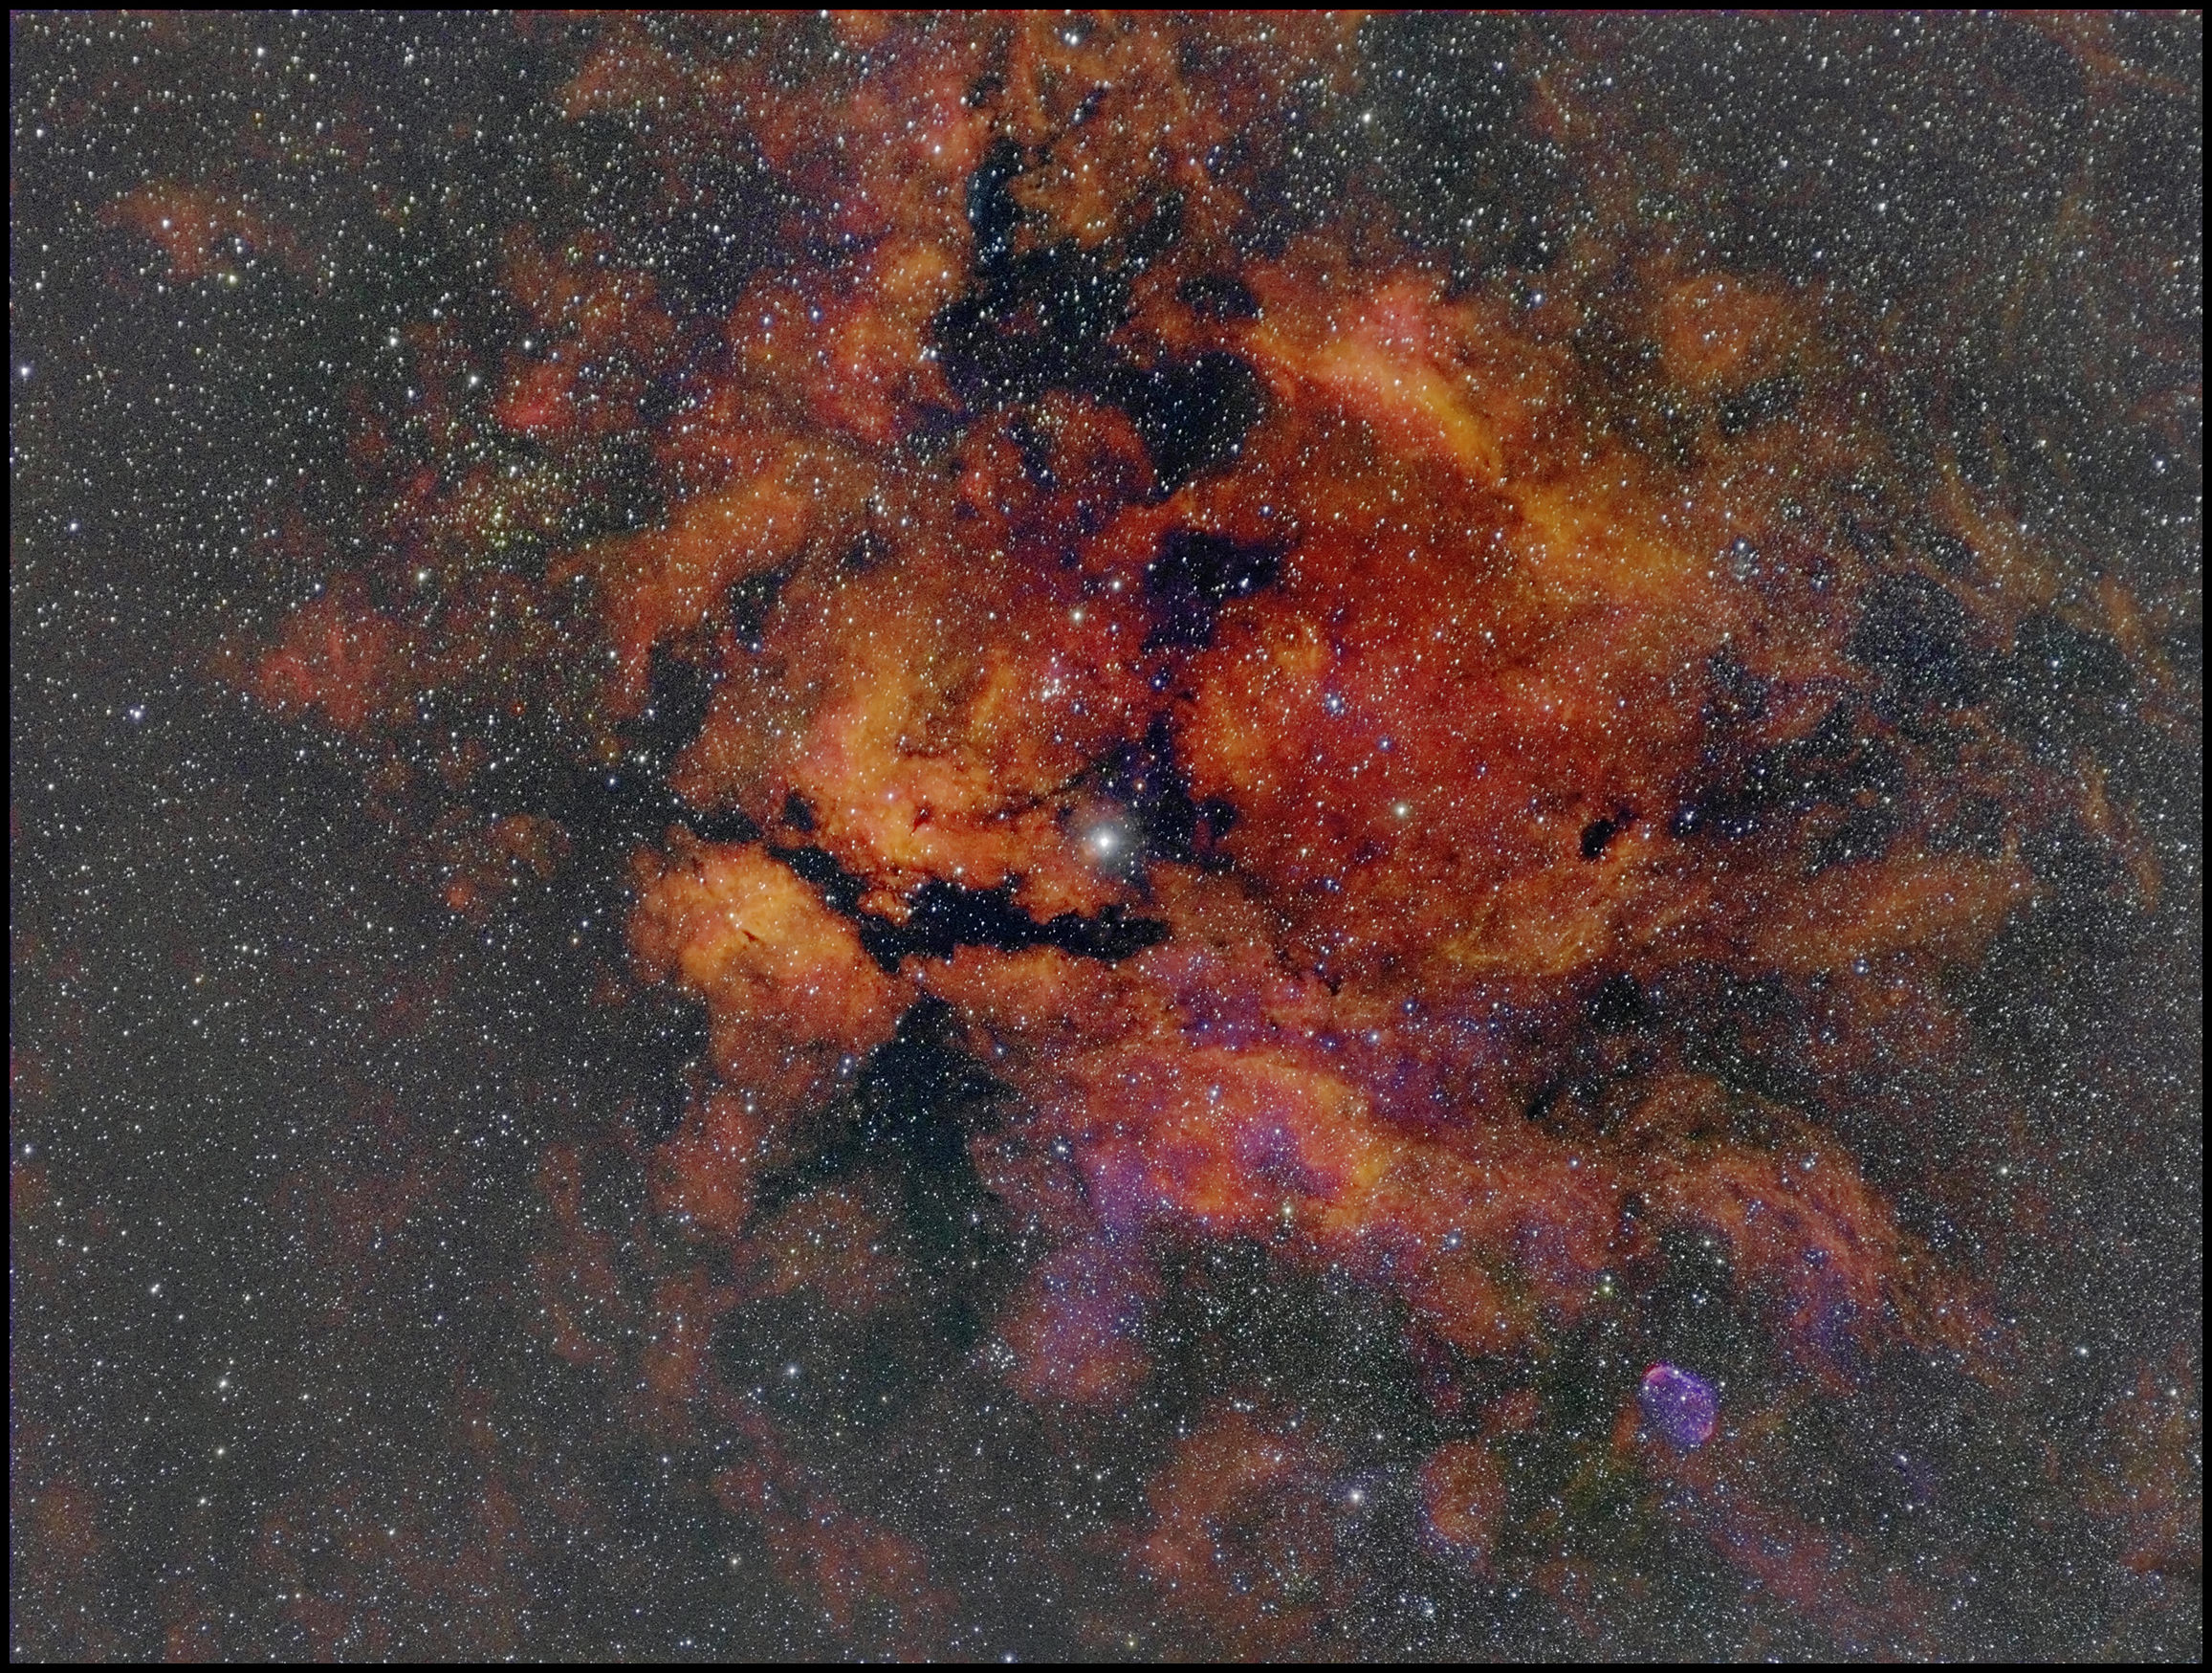 The Sadr Region Nebula with the Crescent visible at botom right